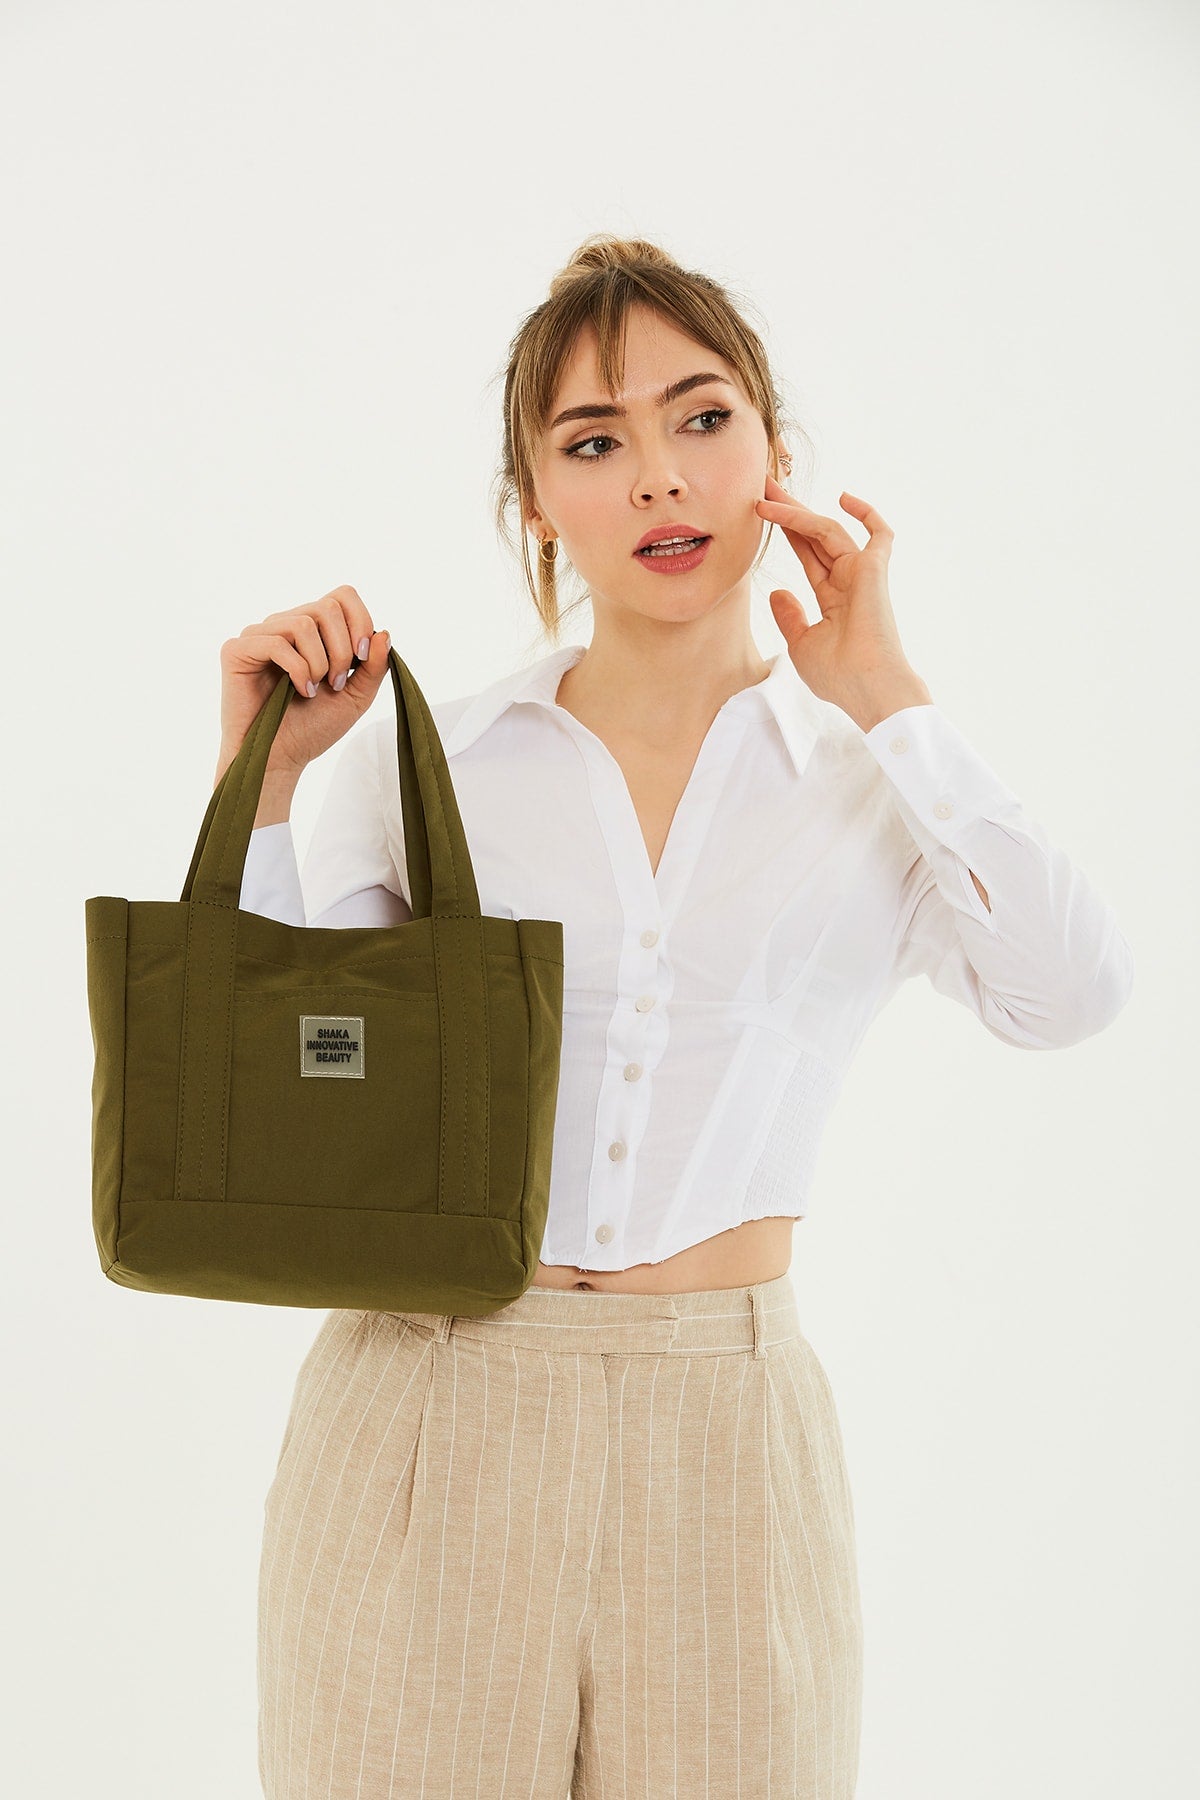 Khaki Green U37 Snap Closure 2 Compartment Front Pocket Detailed Canvas Fabric Casual Women's Arm And Shoulder Bag